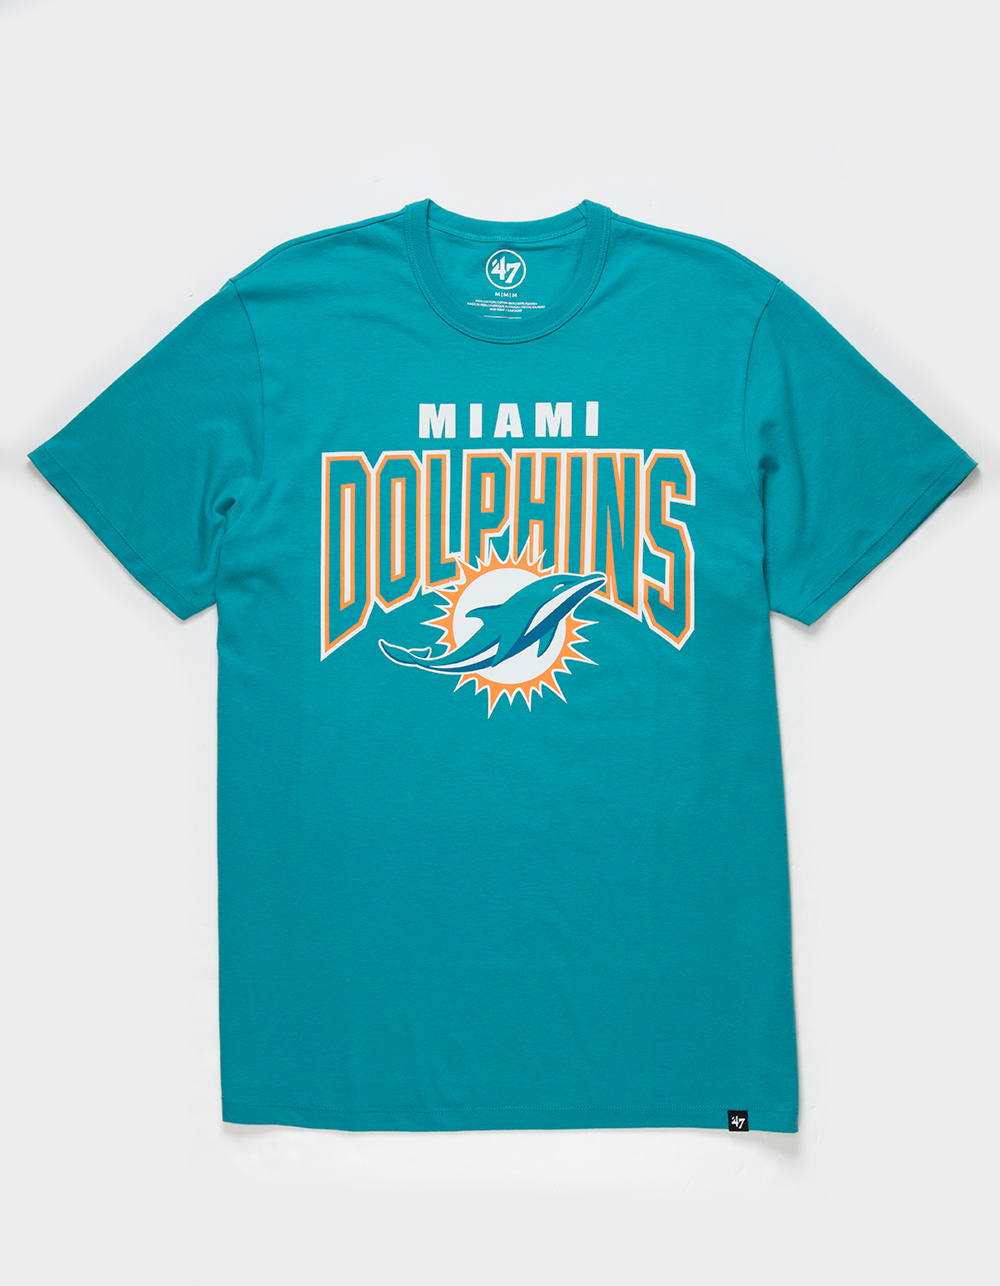 47 BRAND Miami Dolphins Mens Tee - TEAL BLUE